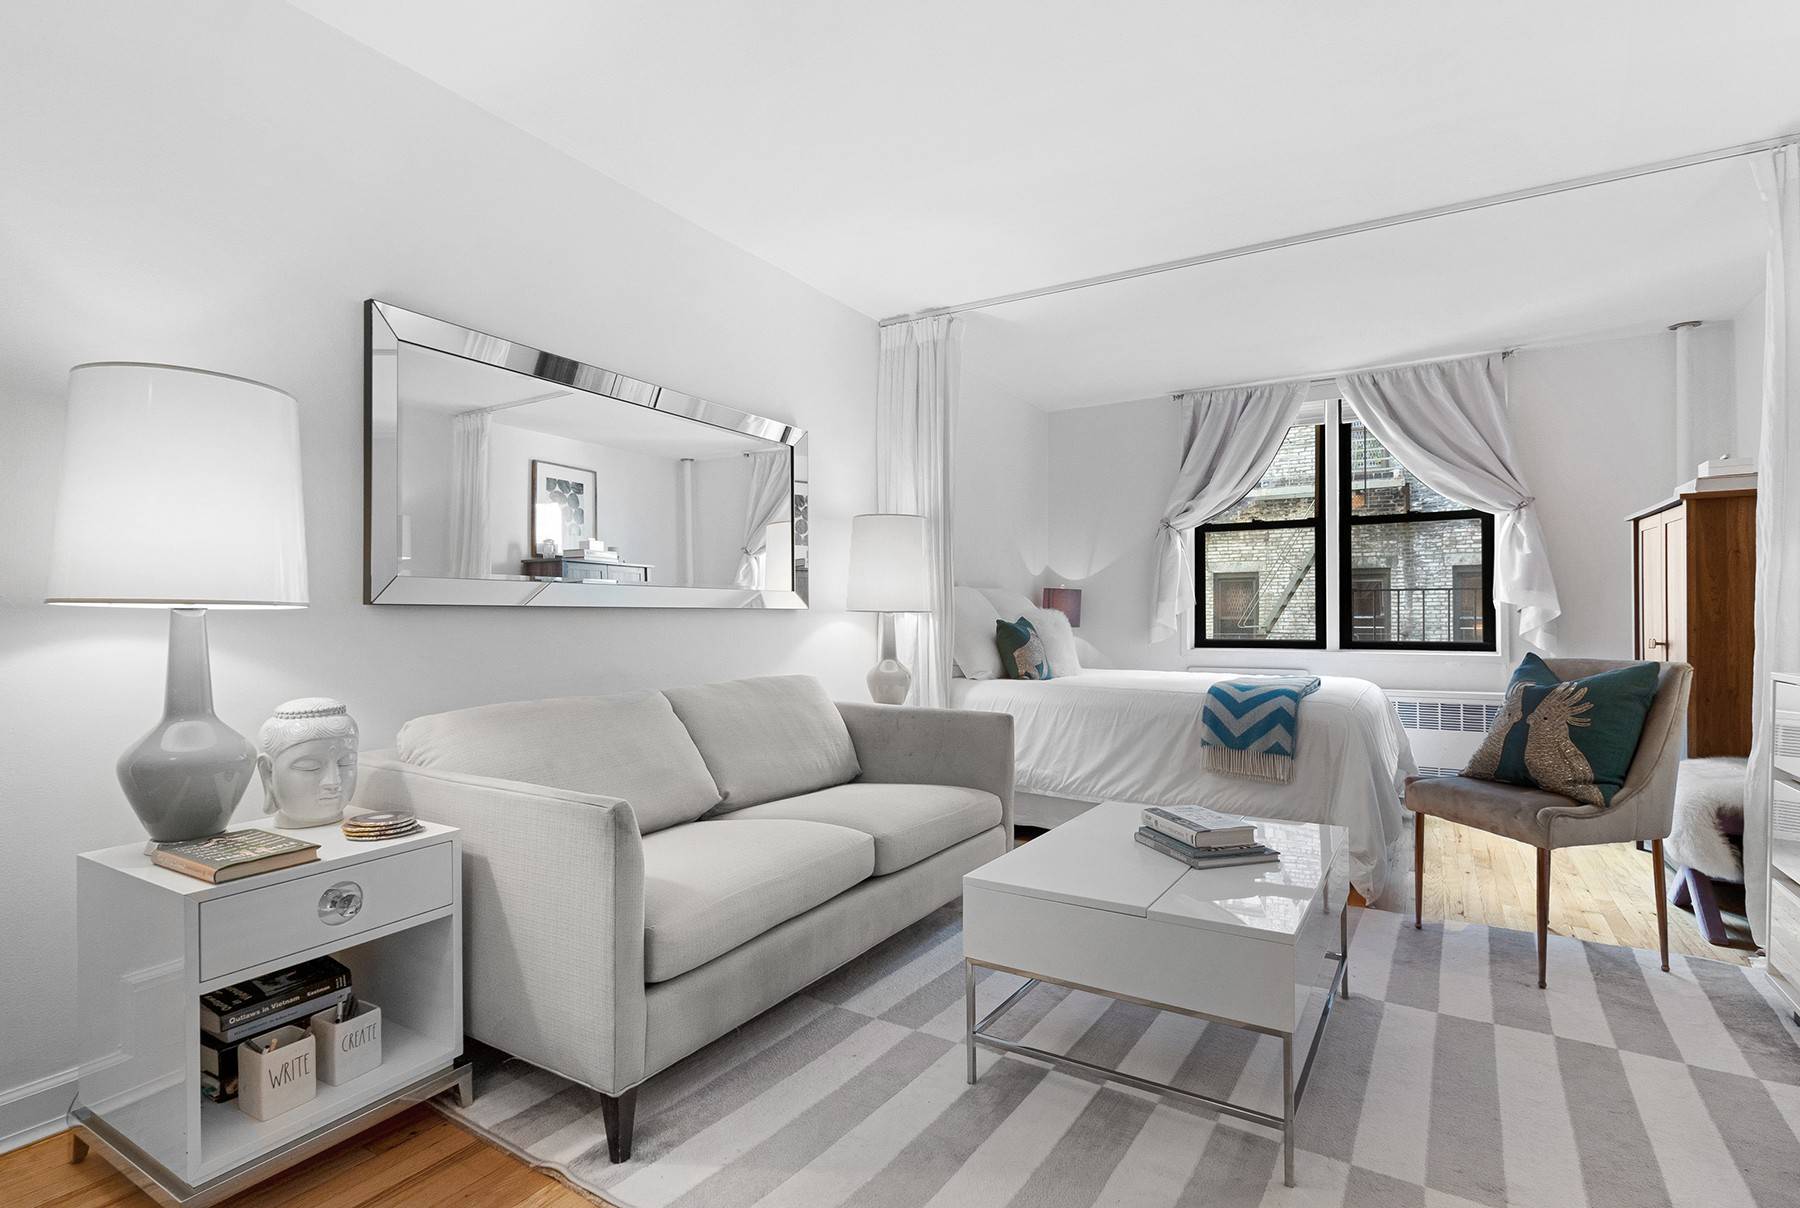 Step into this dreamy, bright, Kips Bay studio and feel like you're floating on a cloud.